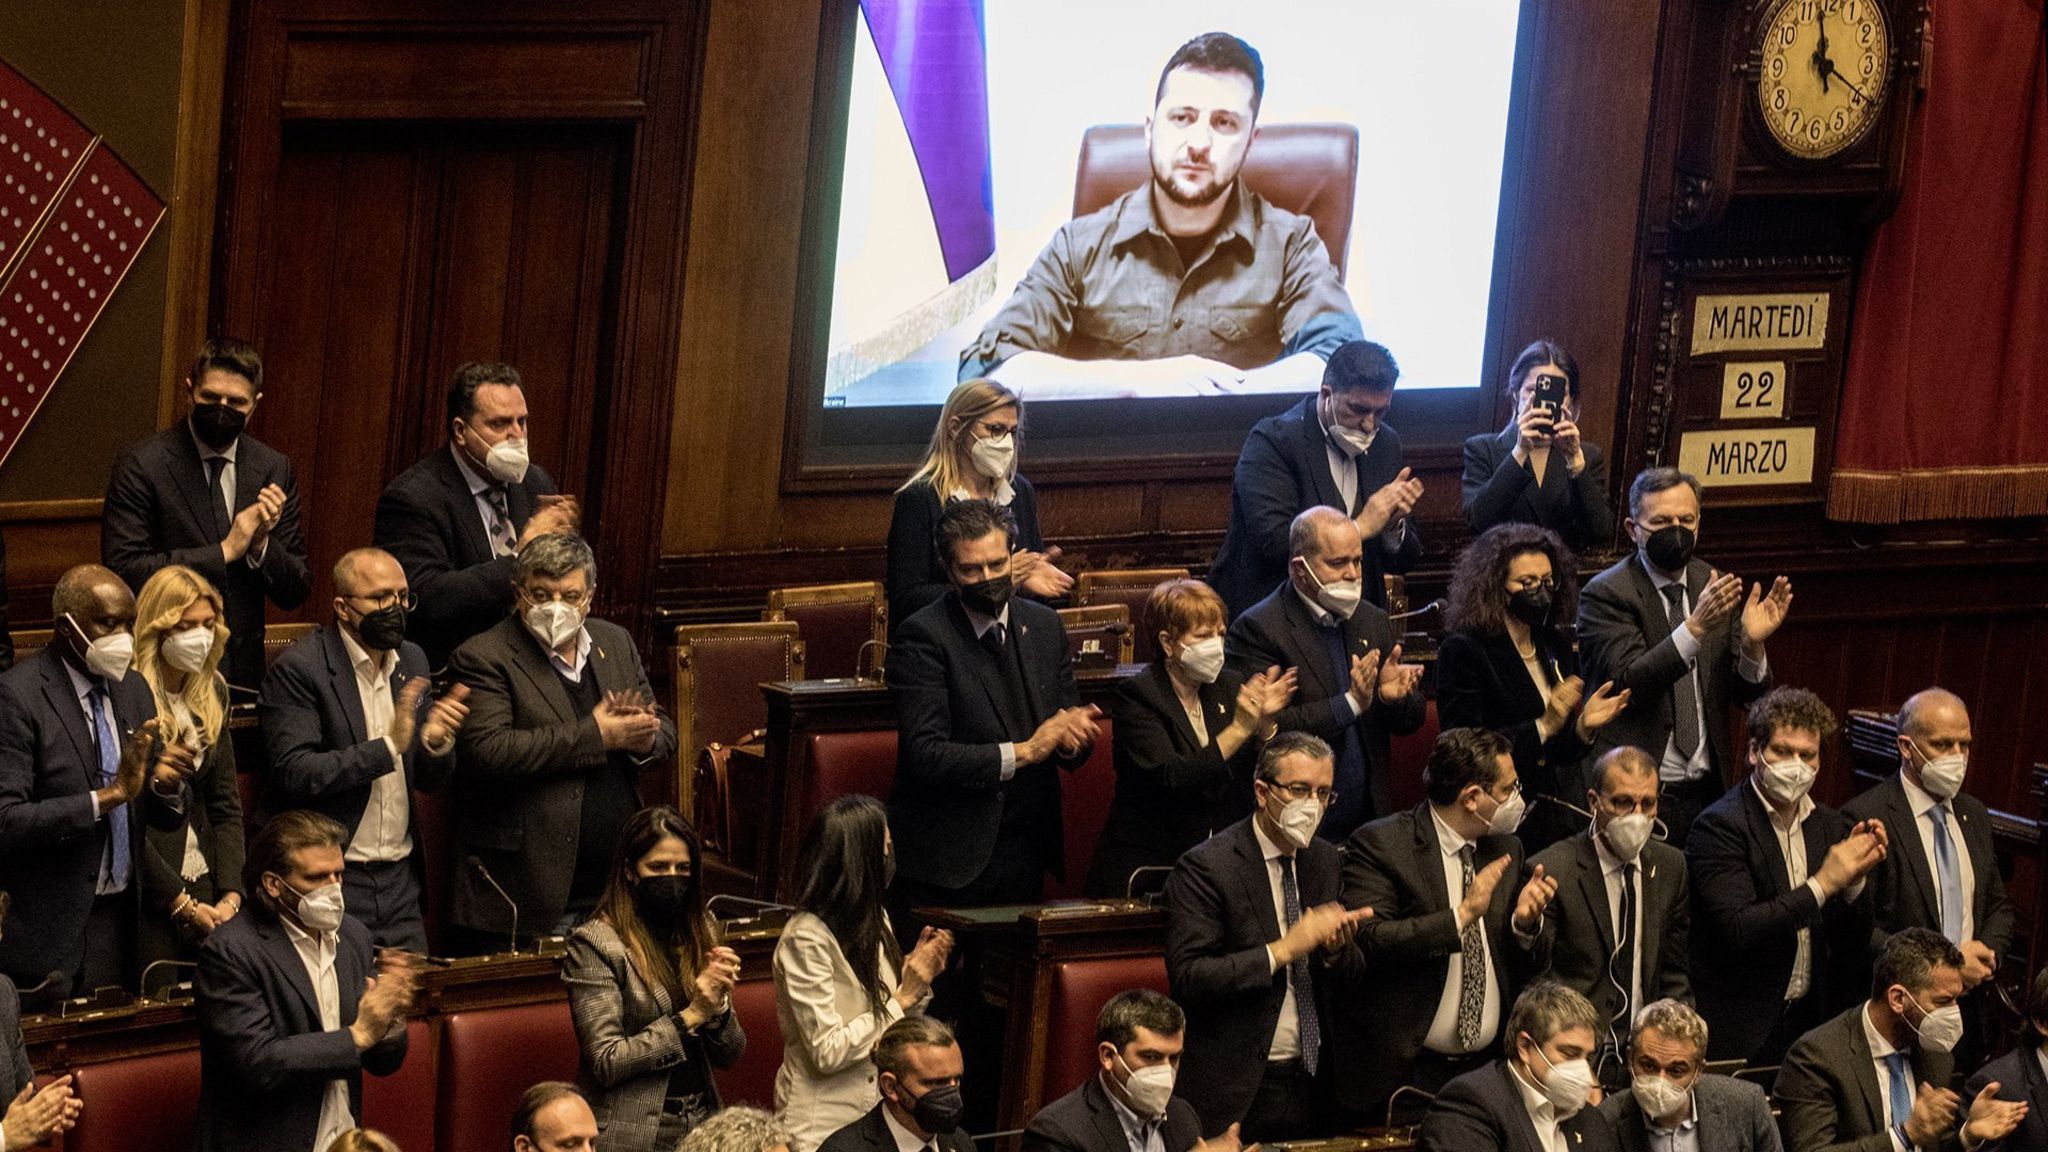 ROME, ITALY - MARCH 22: Ukrainian President Volodymyr Zelensky addresses the Italian Parliament via live video from the embattled city of Kyiv on March 22, 2022 in Rome, Italy.